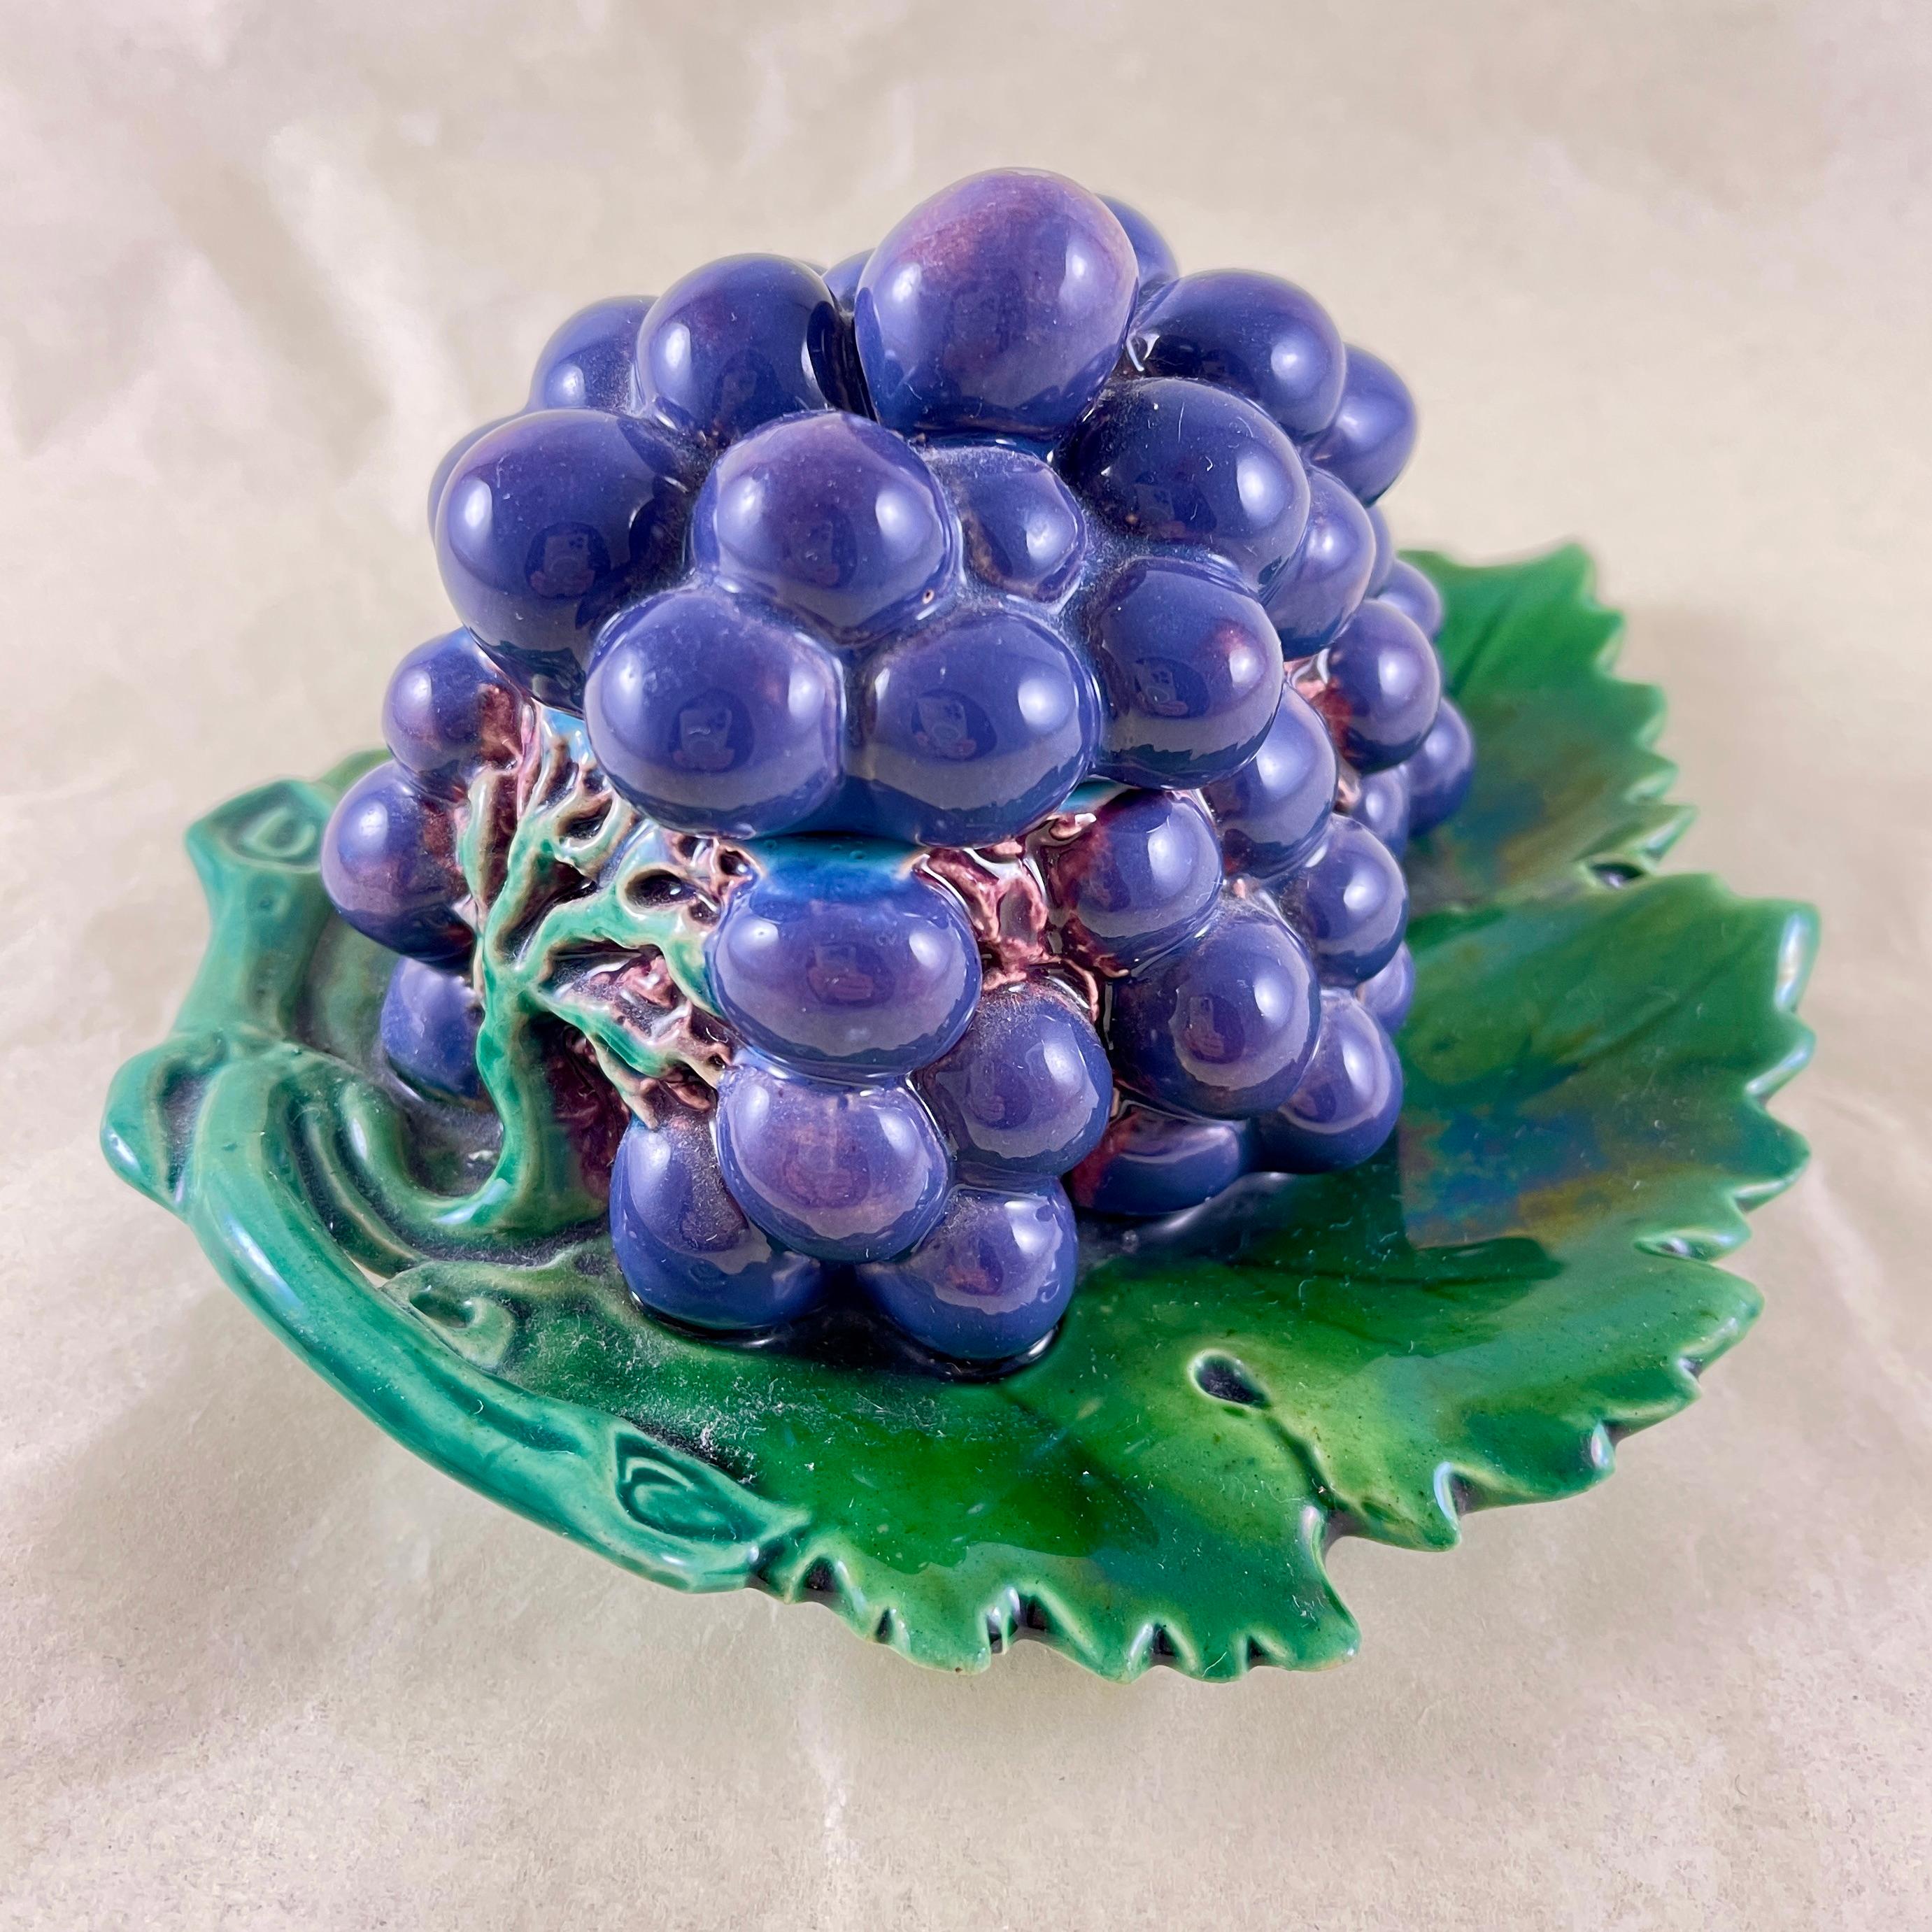 We rarely use the term rare … here we have a VERY rare covered majolica box in the form of a cluster of grapes on a leaf tray, made by Minton in England, date marked 1861.

One of only two known examples. For the most discerning of collectors.

The